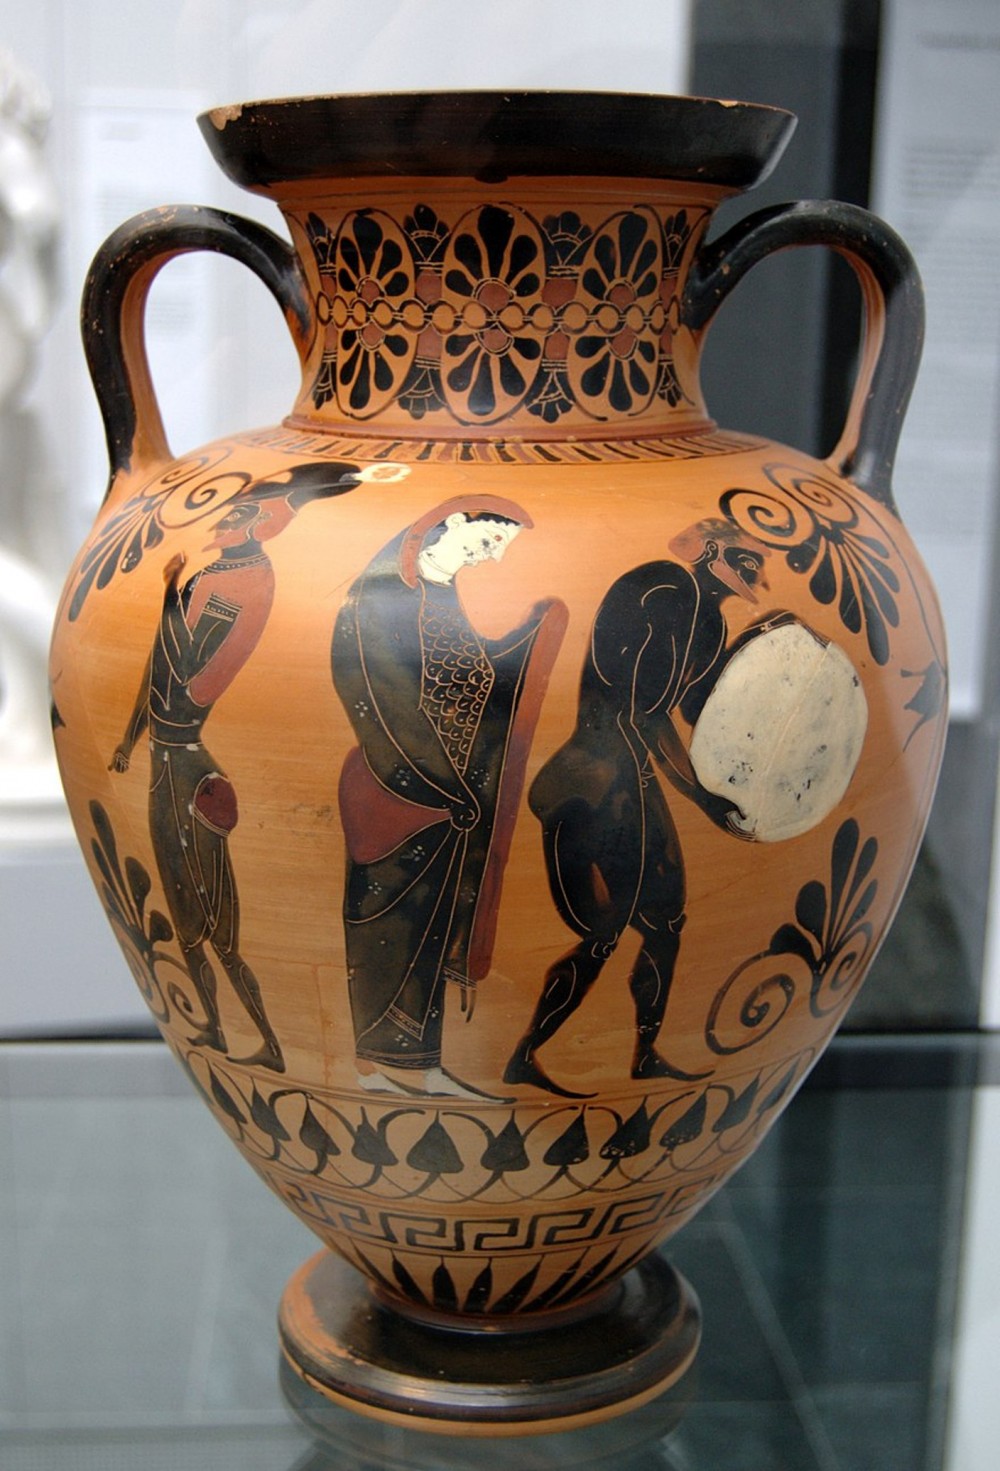 Olbian Painted Ceramics of Hellenistic period: Source to the Studying and History of the Discussion